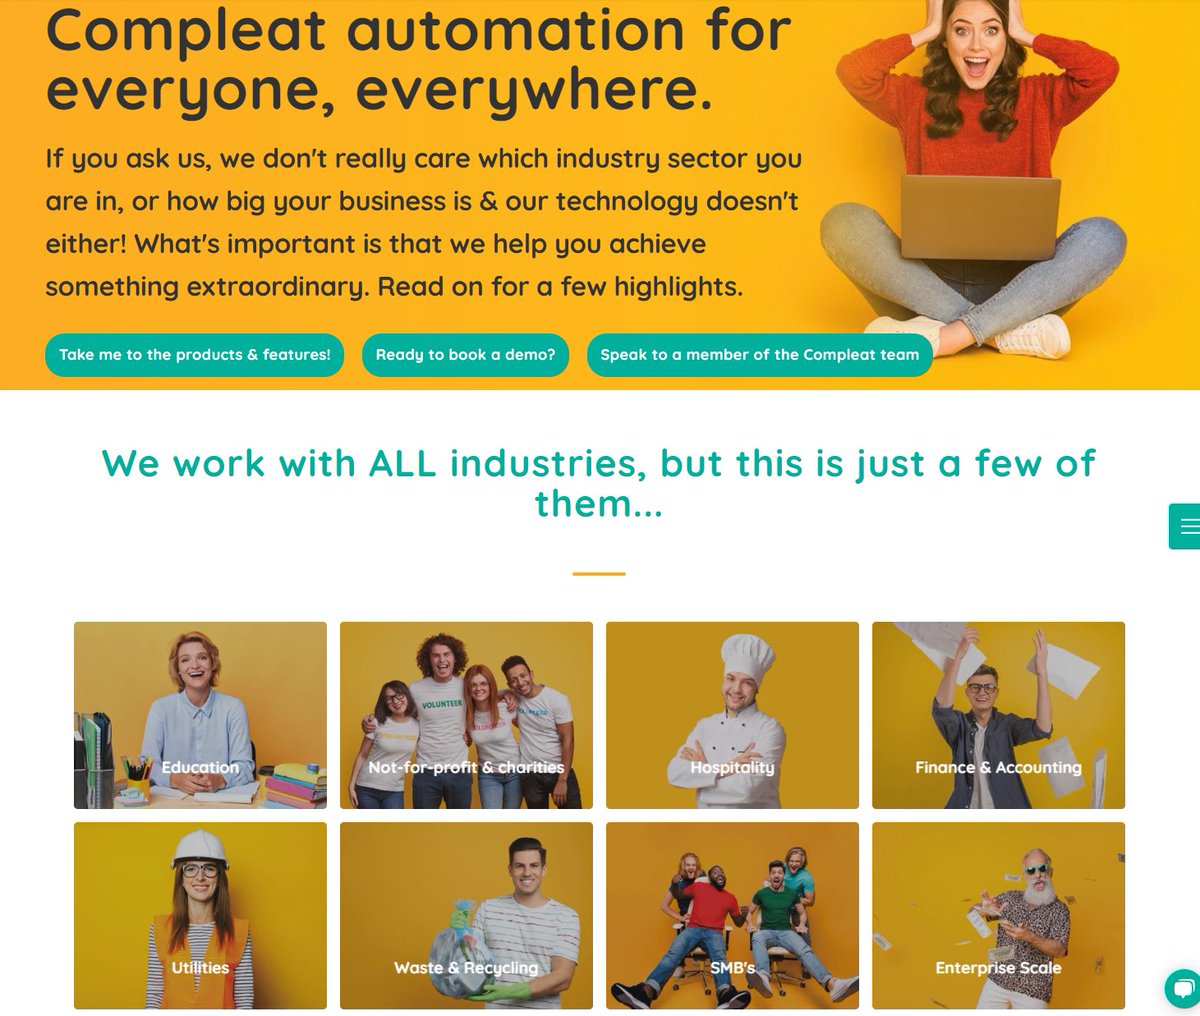 It doesn't matter what industry you are in, but just in case you need some Automation industry knowledge, we got you.

Check out our new, redesigned site.

#Industryautomation #CompleatP2P #thefutureisnow #procurement